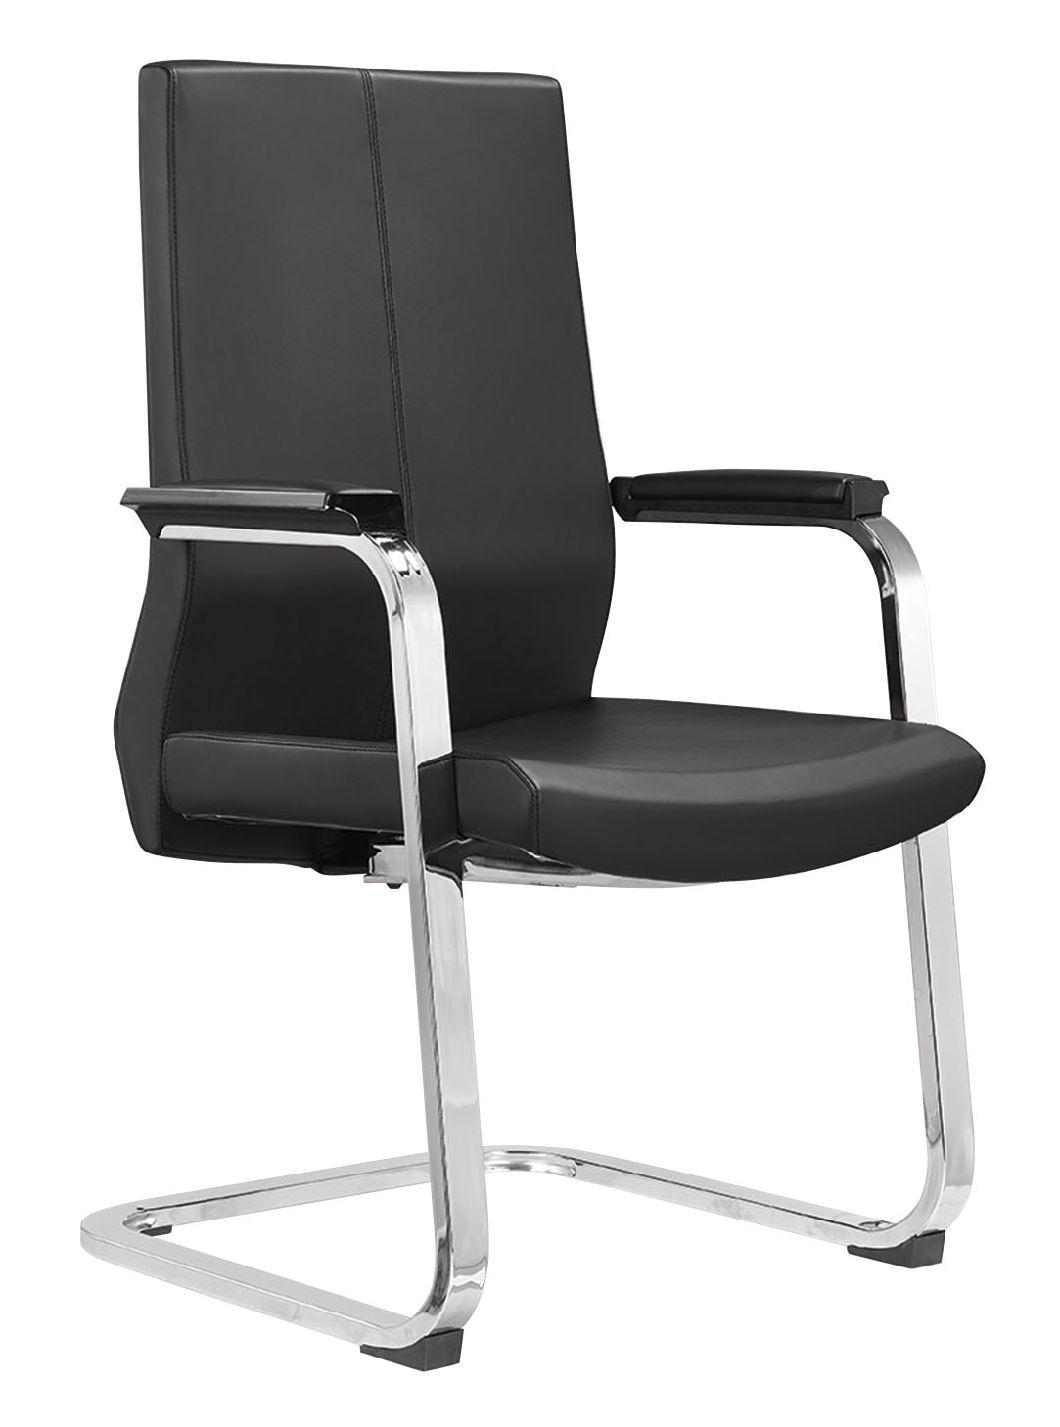 Synthetic Leather Chair Executive Office Chair